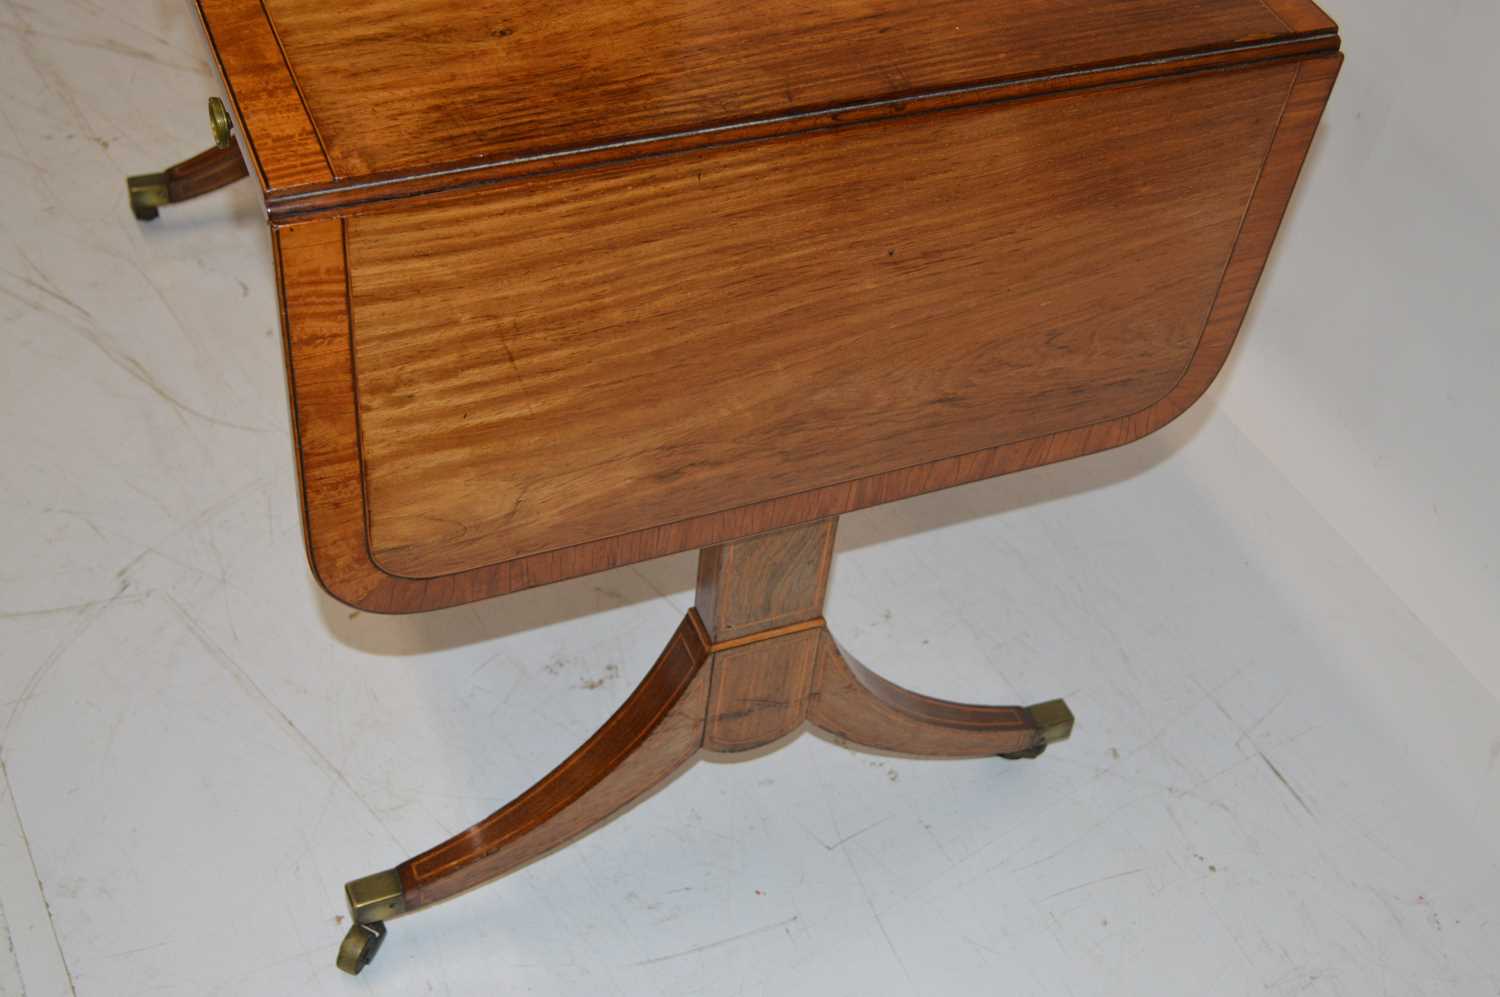 Early 19th-century sofa table of Regency design - Image 4 of 6